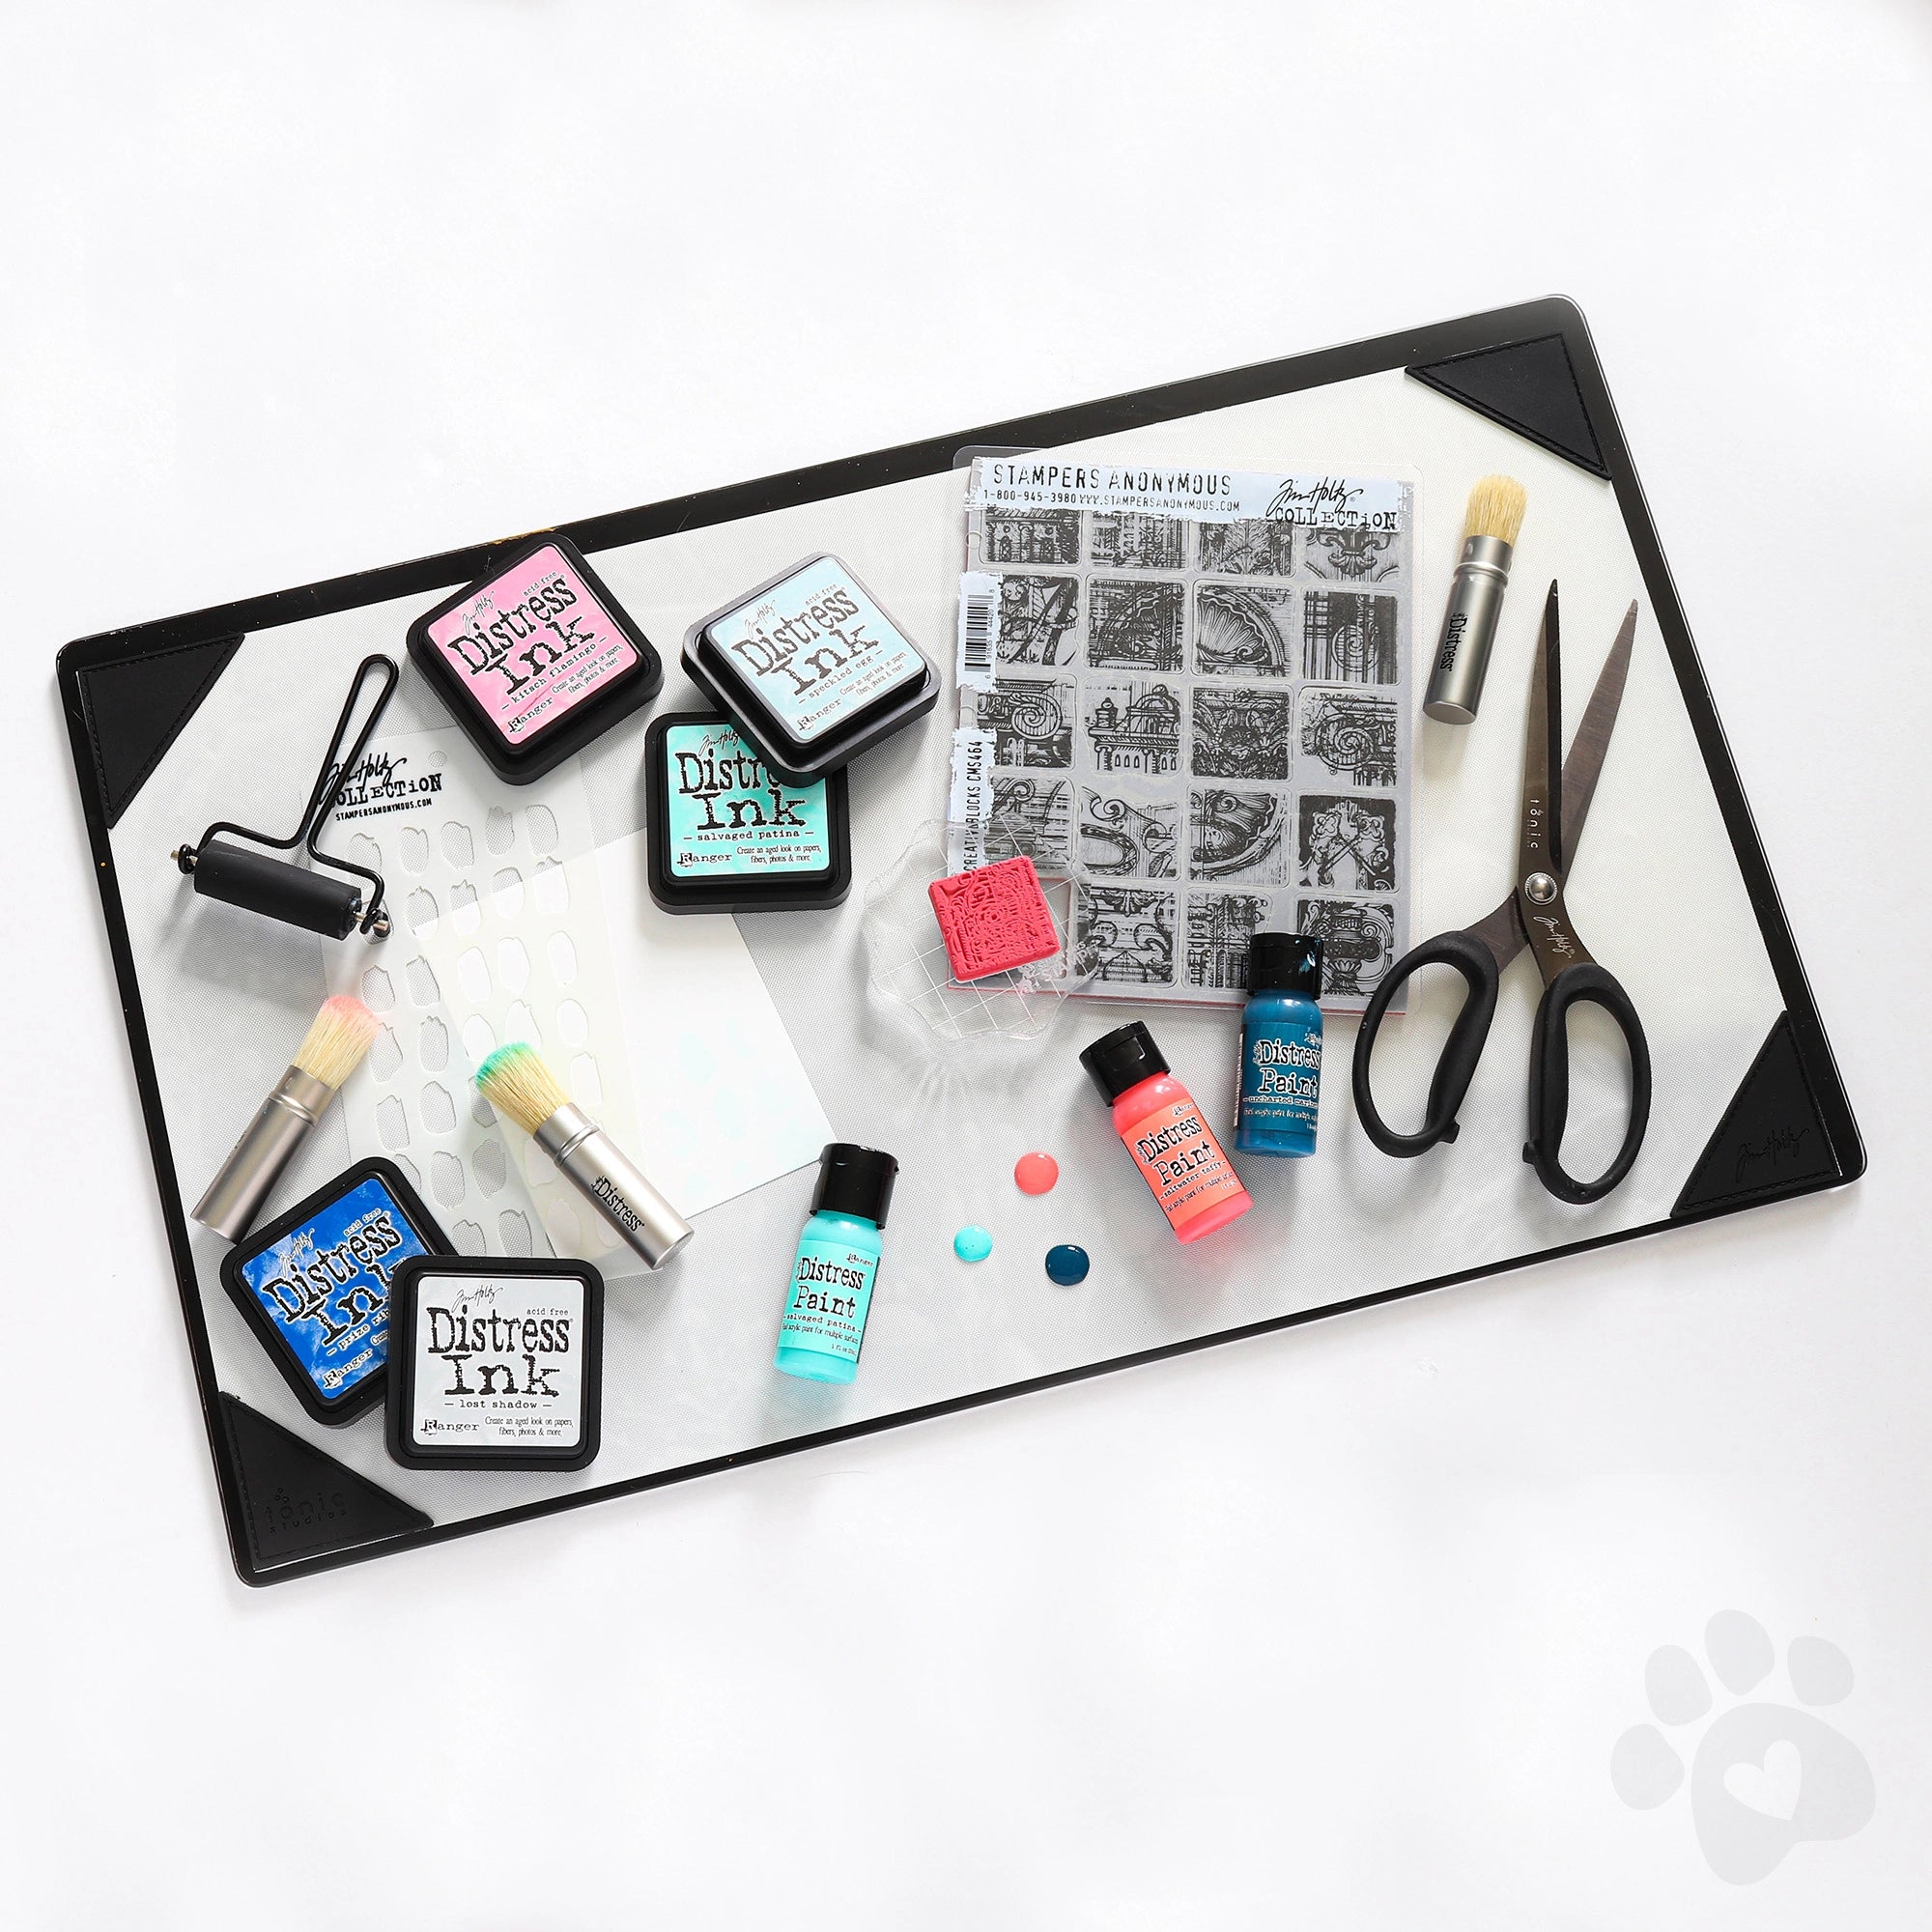 Review of the Tim Holtz Glass Media Mat: Do You Need One? - Conquer Your  Cricut, Cameo & ScanNCut Confusion!